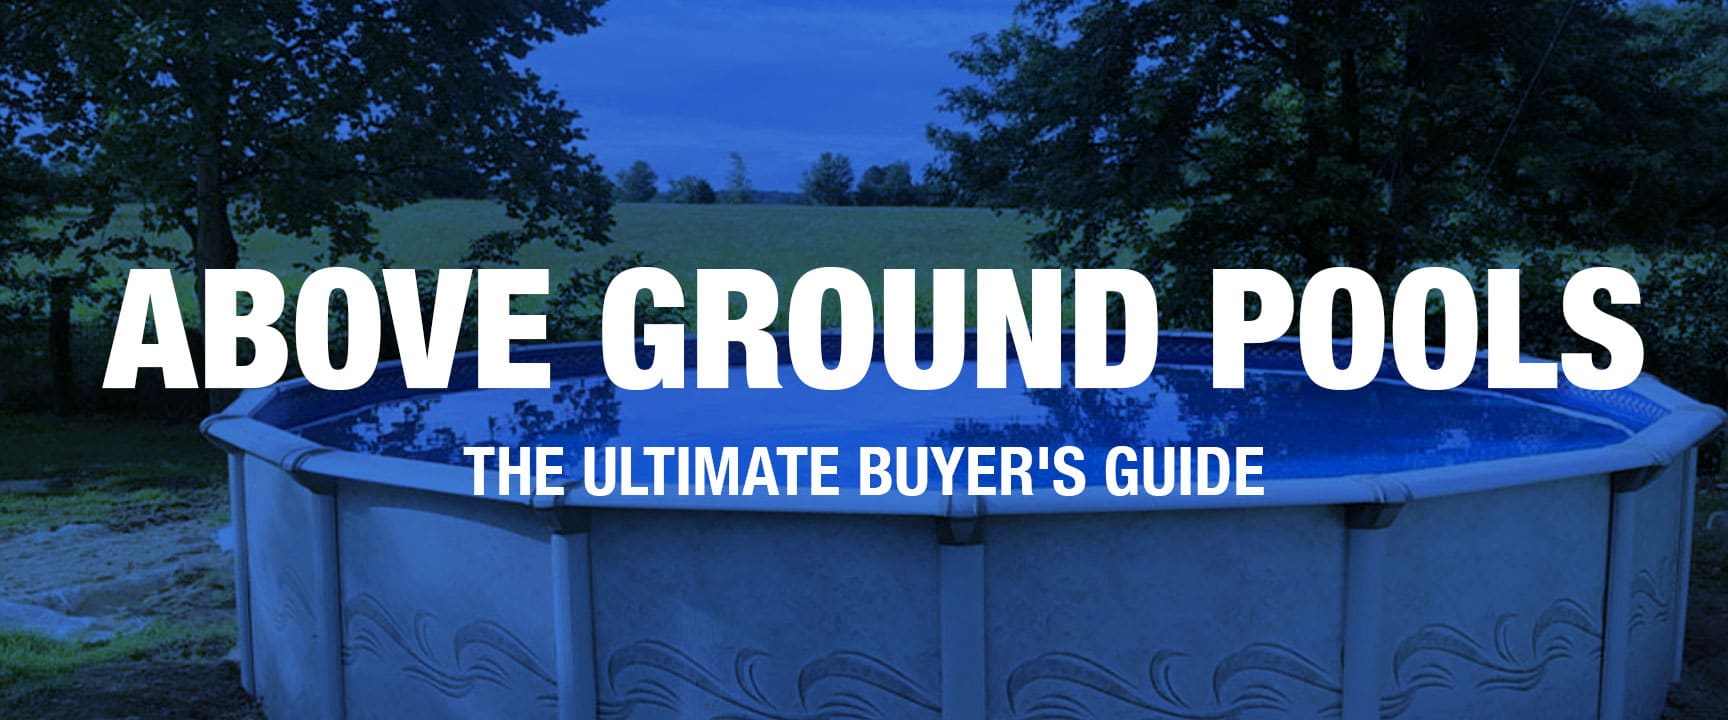 Above-Ground Pool Buyer’s Guide